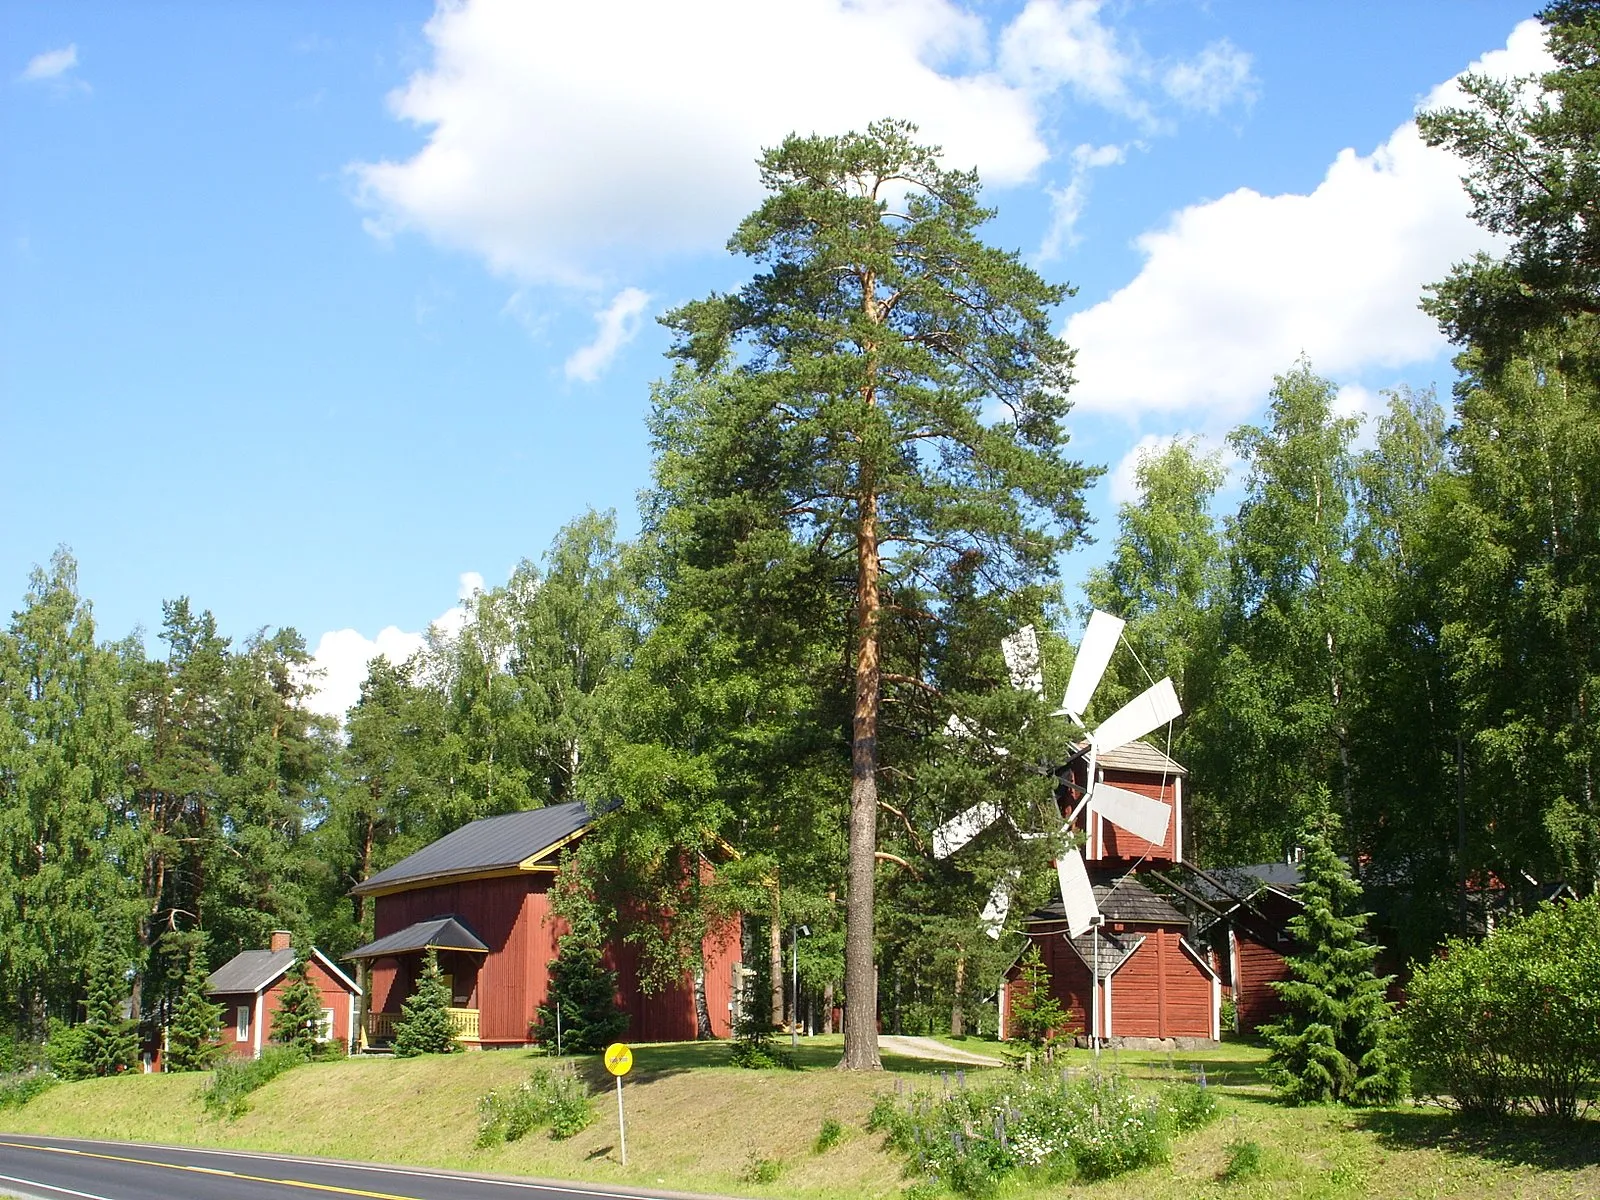 Photo showing: Jalasjarvi local heritage museum
Museum: The local heritage museum of Jalasjarvi has two wind mills. The wind mills have become symbols of Jalasjarvi like the proverb:Jalasjarvi is the gate of Botnia. There are restaurauted wind mills also in the villages of Hirvijarvi and Luopajarvi. The most famous wind mill is on the hill of Aittoomaki just on the left side of the highway of valtatie 3. In Jalasjarvi a small scale wind mill models are sold for gardens. The museum has several wooden houses brought also from the other municipalities. On the territory of the museum there are also two houses, which do not belong to the museum itself, but also help to preserve local traditions and local heritage: Pelimannitalo (the house of folk music players) and Perinnetalo (the house for the heritage of the war veterans).

Photograph: Samsung S850, Olli-Jukka Paloneva, paloneva@phnet.fi, 4th July, 2007, N 62°30.112', E 022°44.293'